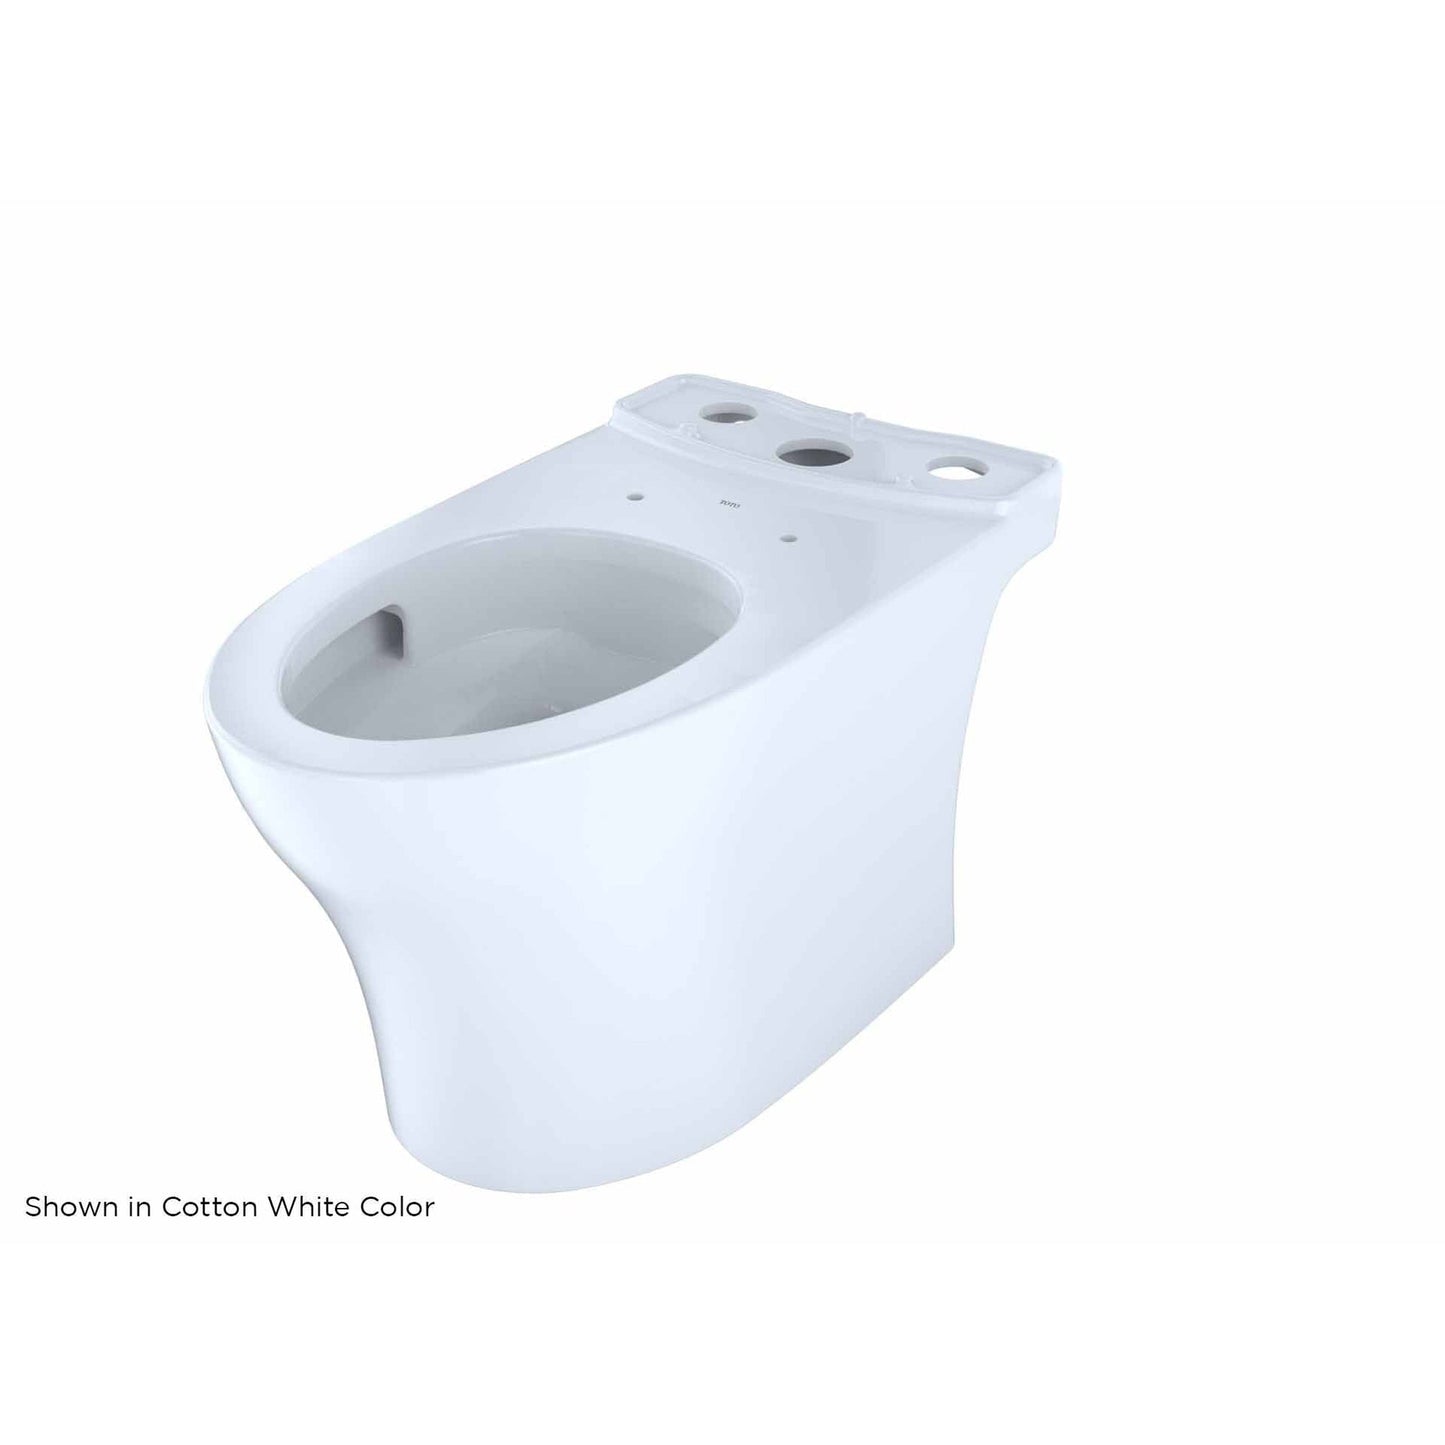 TOTO Aquia IV Bone 1.0 GPF & 0.8 GPF Dual-Flush Two-Piece Elongated Chair Height Toilet With WASHLET+ Connection - SoftClose Seat Included